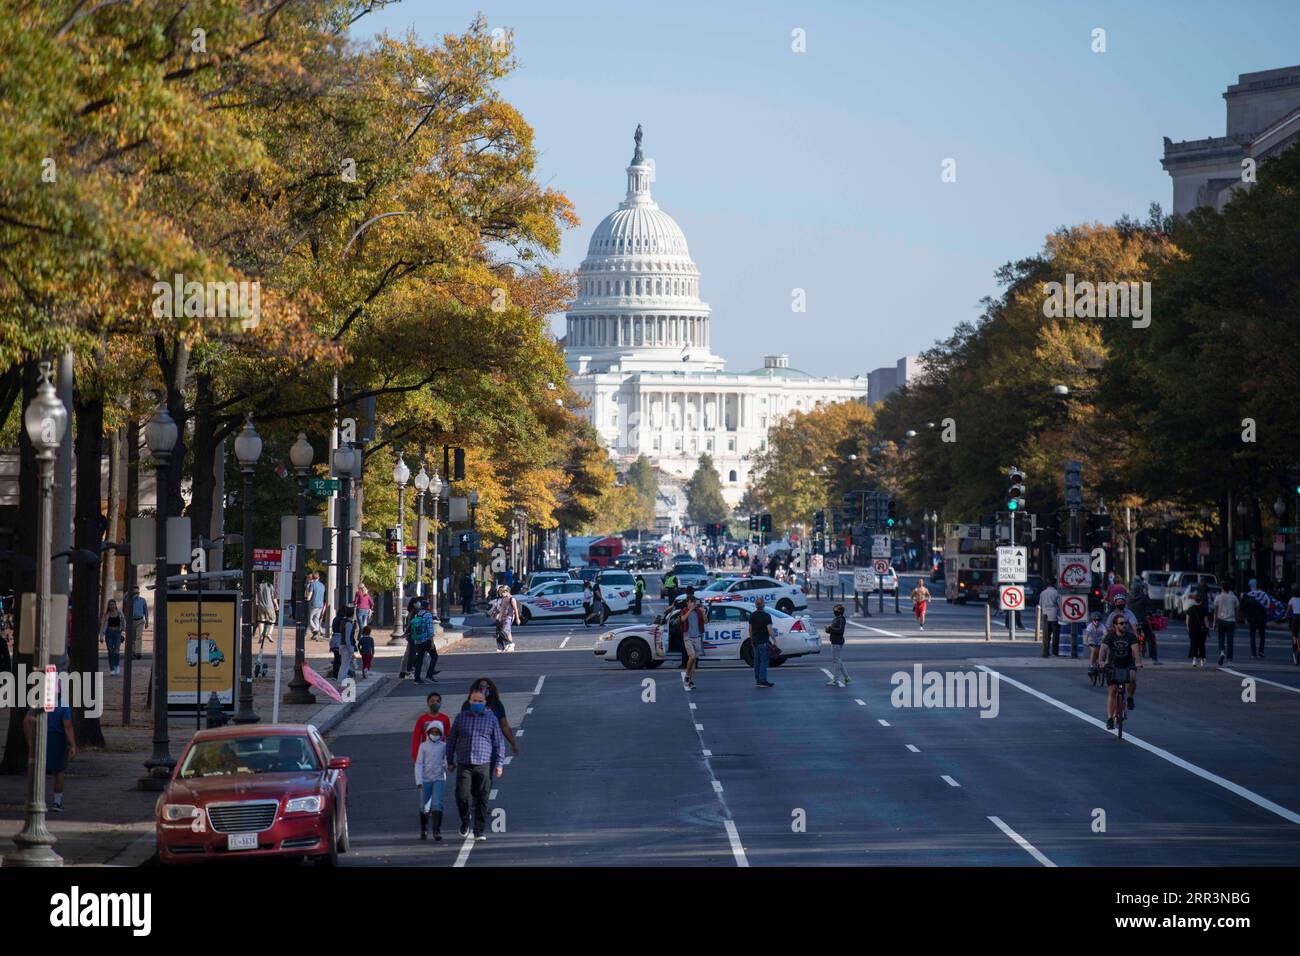 201107 -- WASHINGTON, Nov. 7, 2020 -- Photo taken on Nov. 7, 2020 shows the U.S. Capitol building in Washington, D.C., the United States. U.S. Democratic presidential nominee Joe Biden was projected Saturday by multiple U.S. media outlets to be the winner of the 2020 election. Sitting President Donald Trump said the election is far from over, vowing to take legal actions.  U.S.-WASHINGTON, D.C.-2020 U.S. ELECTION LiuxJie PUBLICATIONxNOTxINxCHN Stock Photo